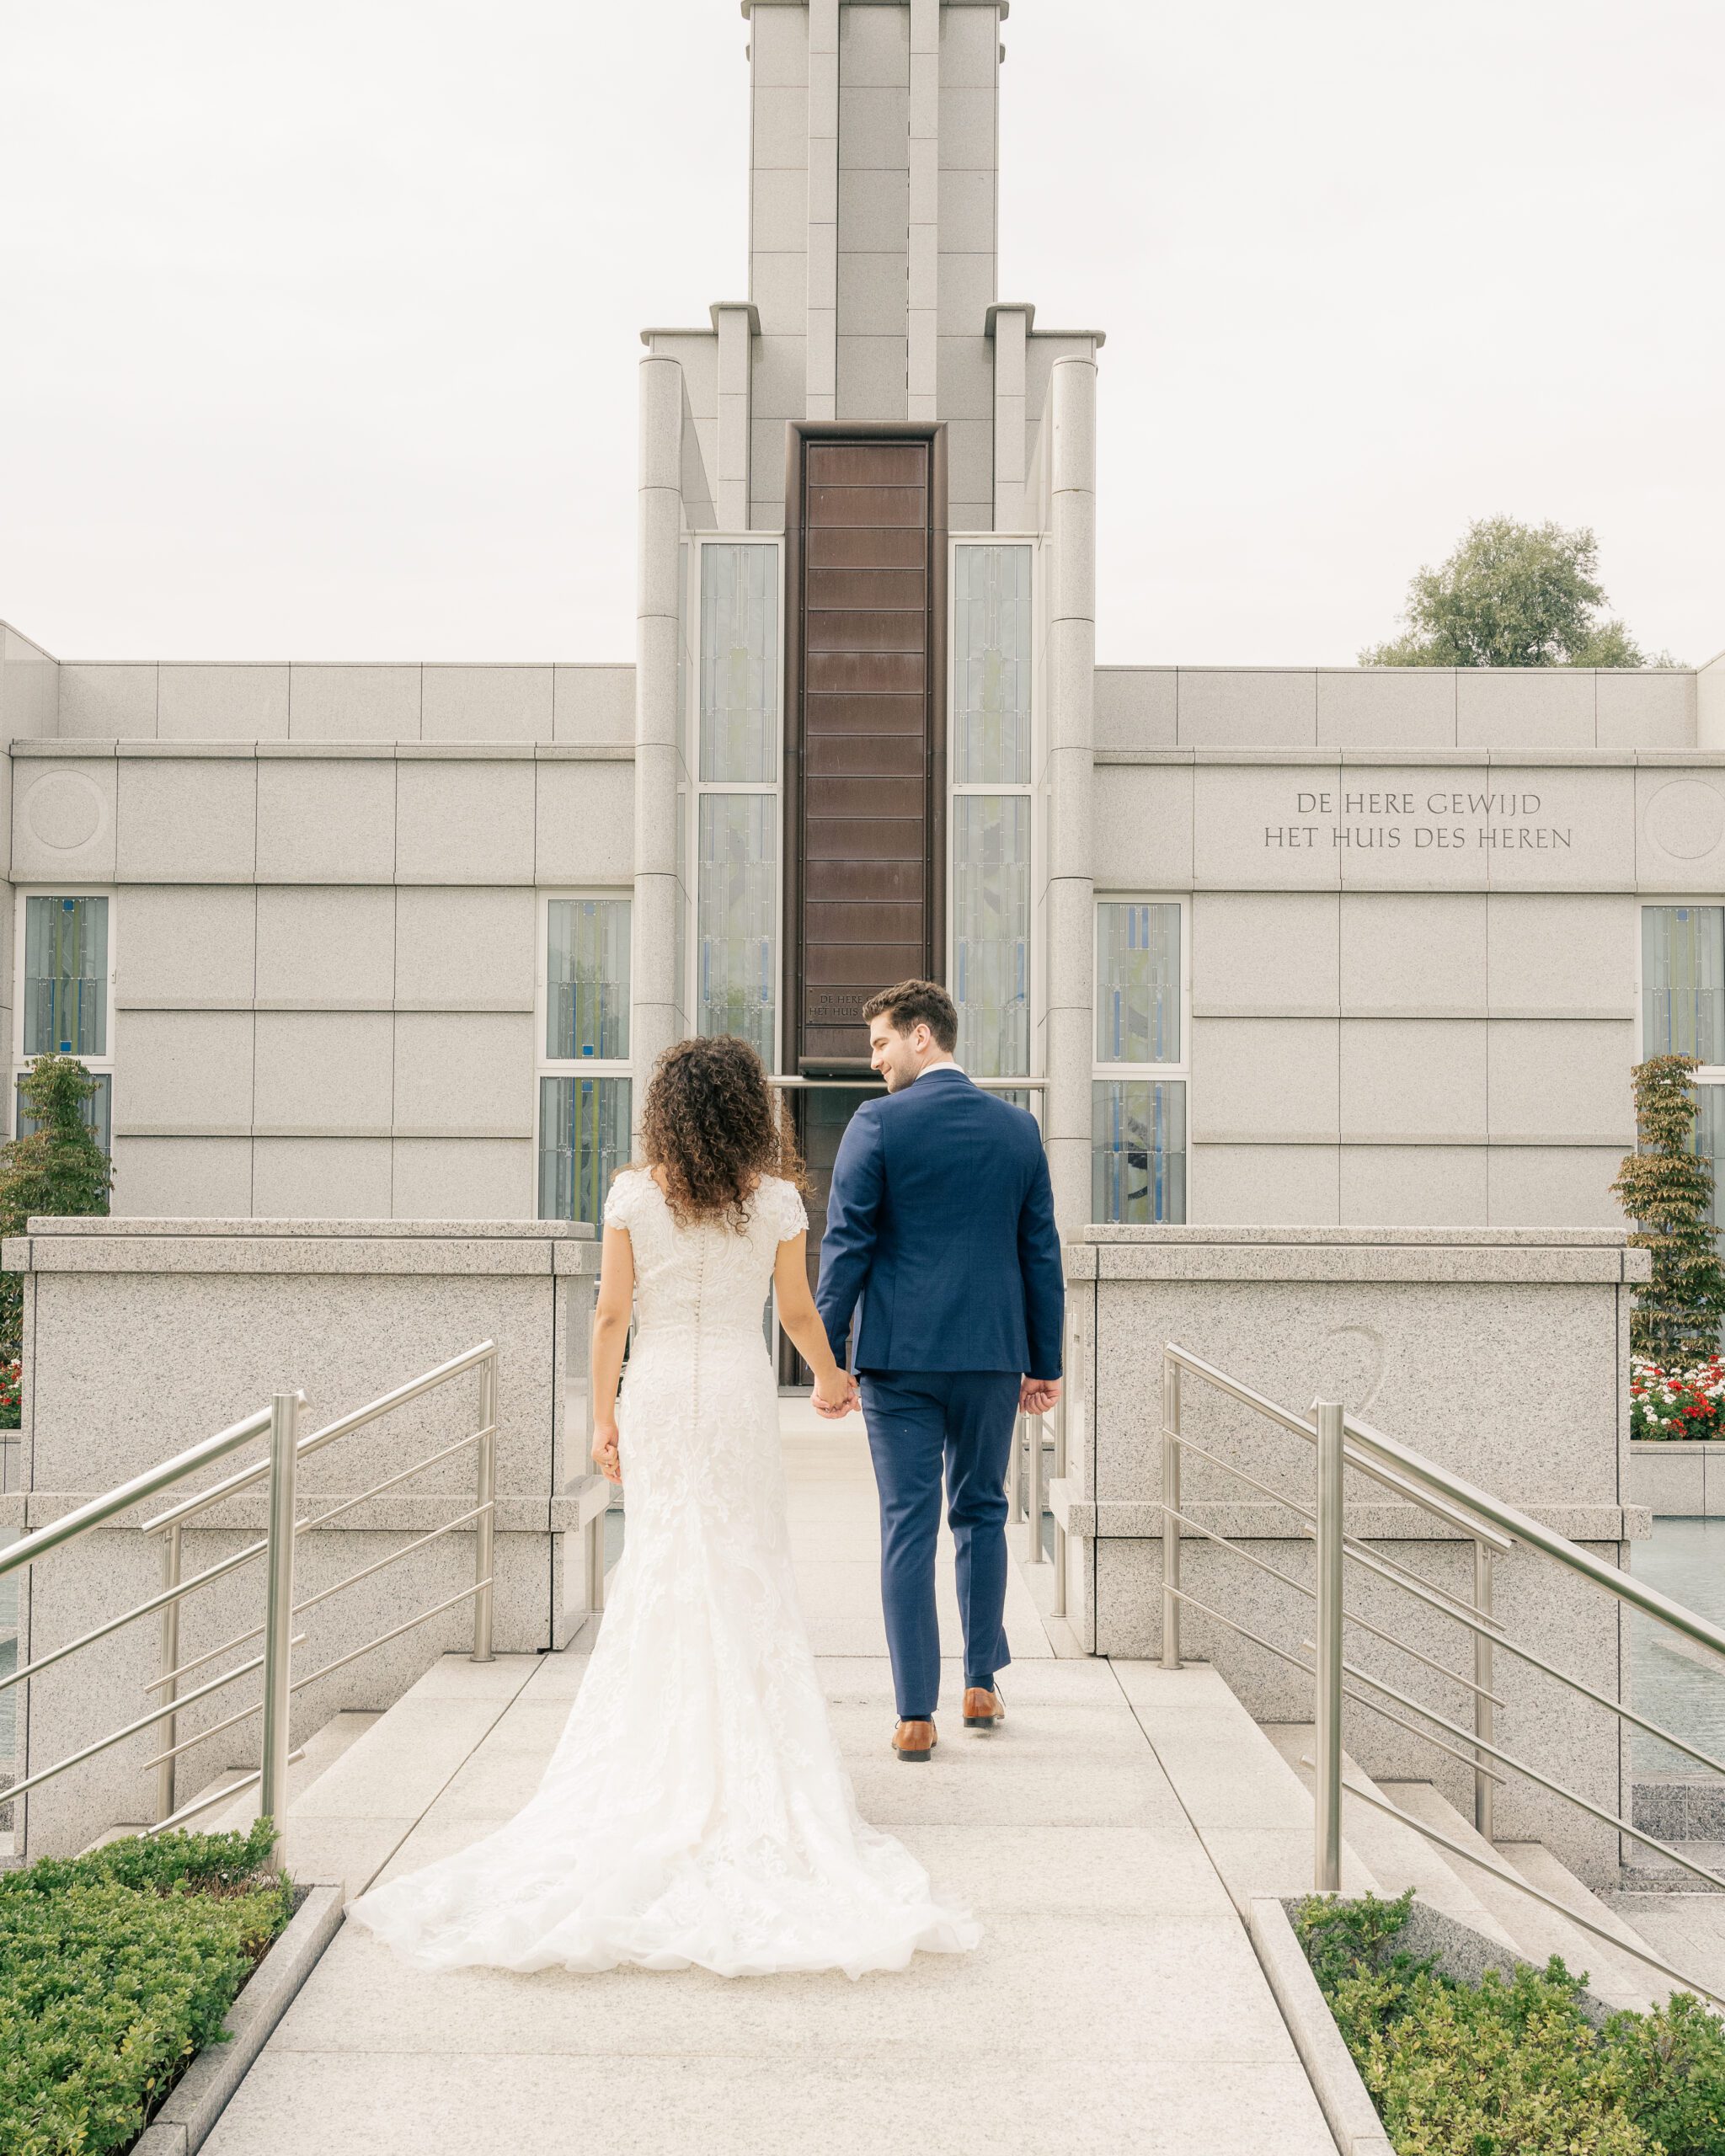 A bride and groom walk up the path to the Hague Netherlands Temple after their temple sealing